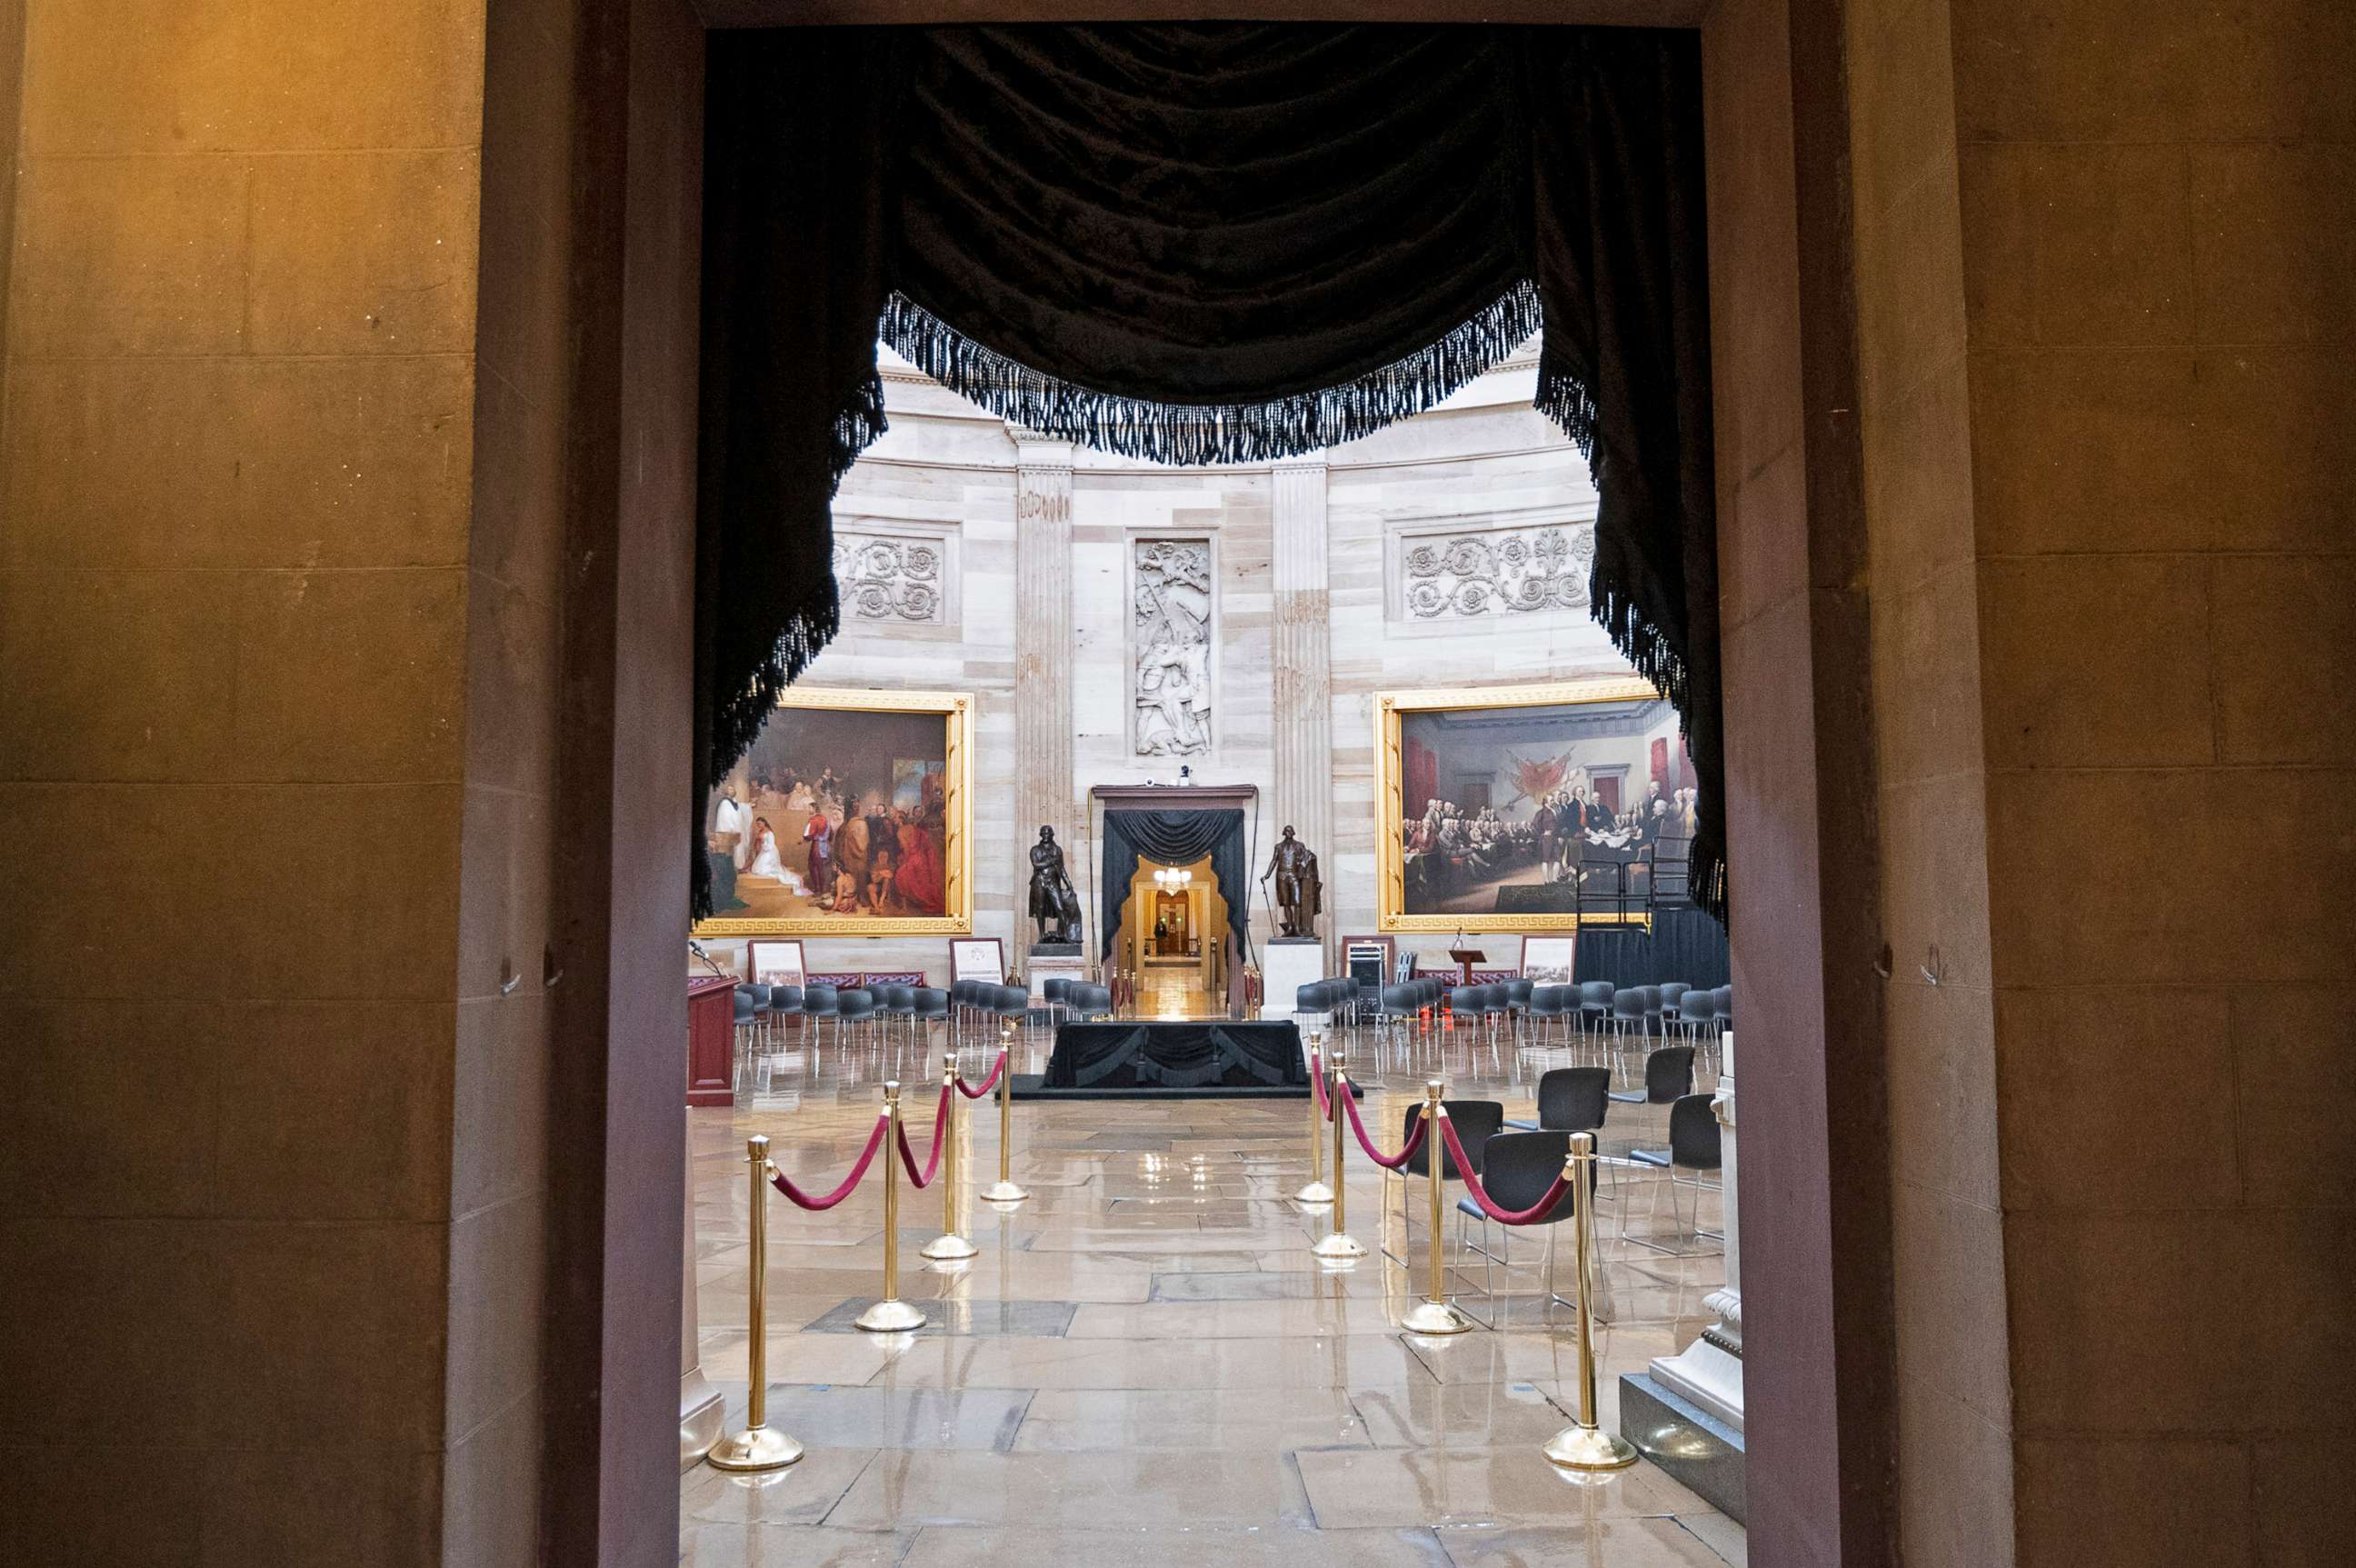 PHOTO: The Lincoln catafalque is set up in the Capitol Rotunda on Jan. 10, 2022, in preparation for former Senate Majority Leader Harry Reid to lie in state on Wednesday, Jan. 12, 2022 in Washington, D.C.